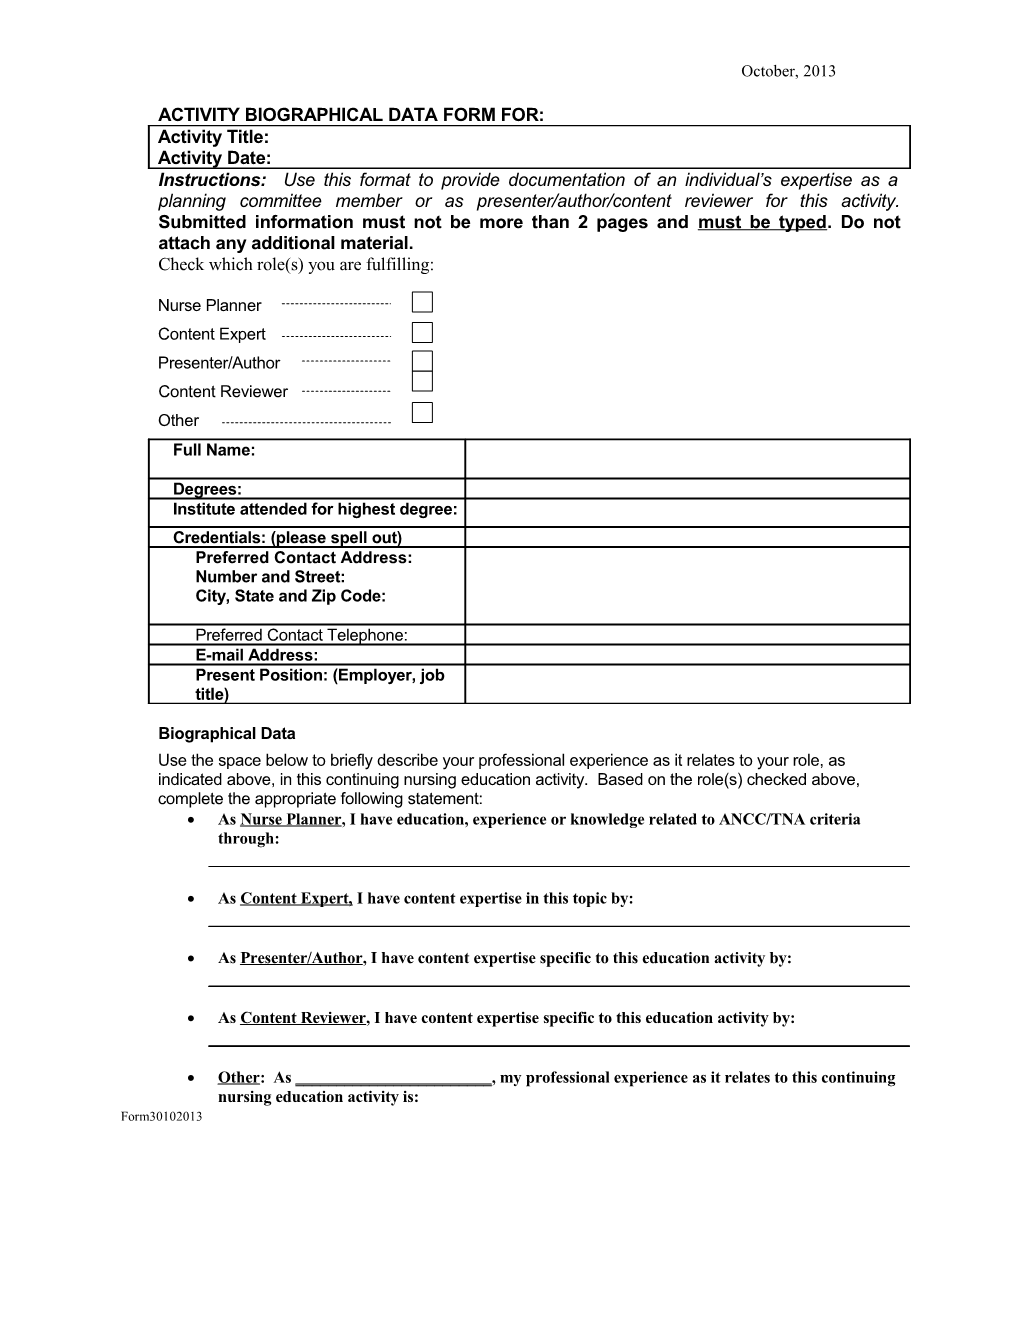 Activity Biographical Data Form For